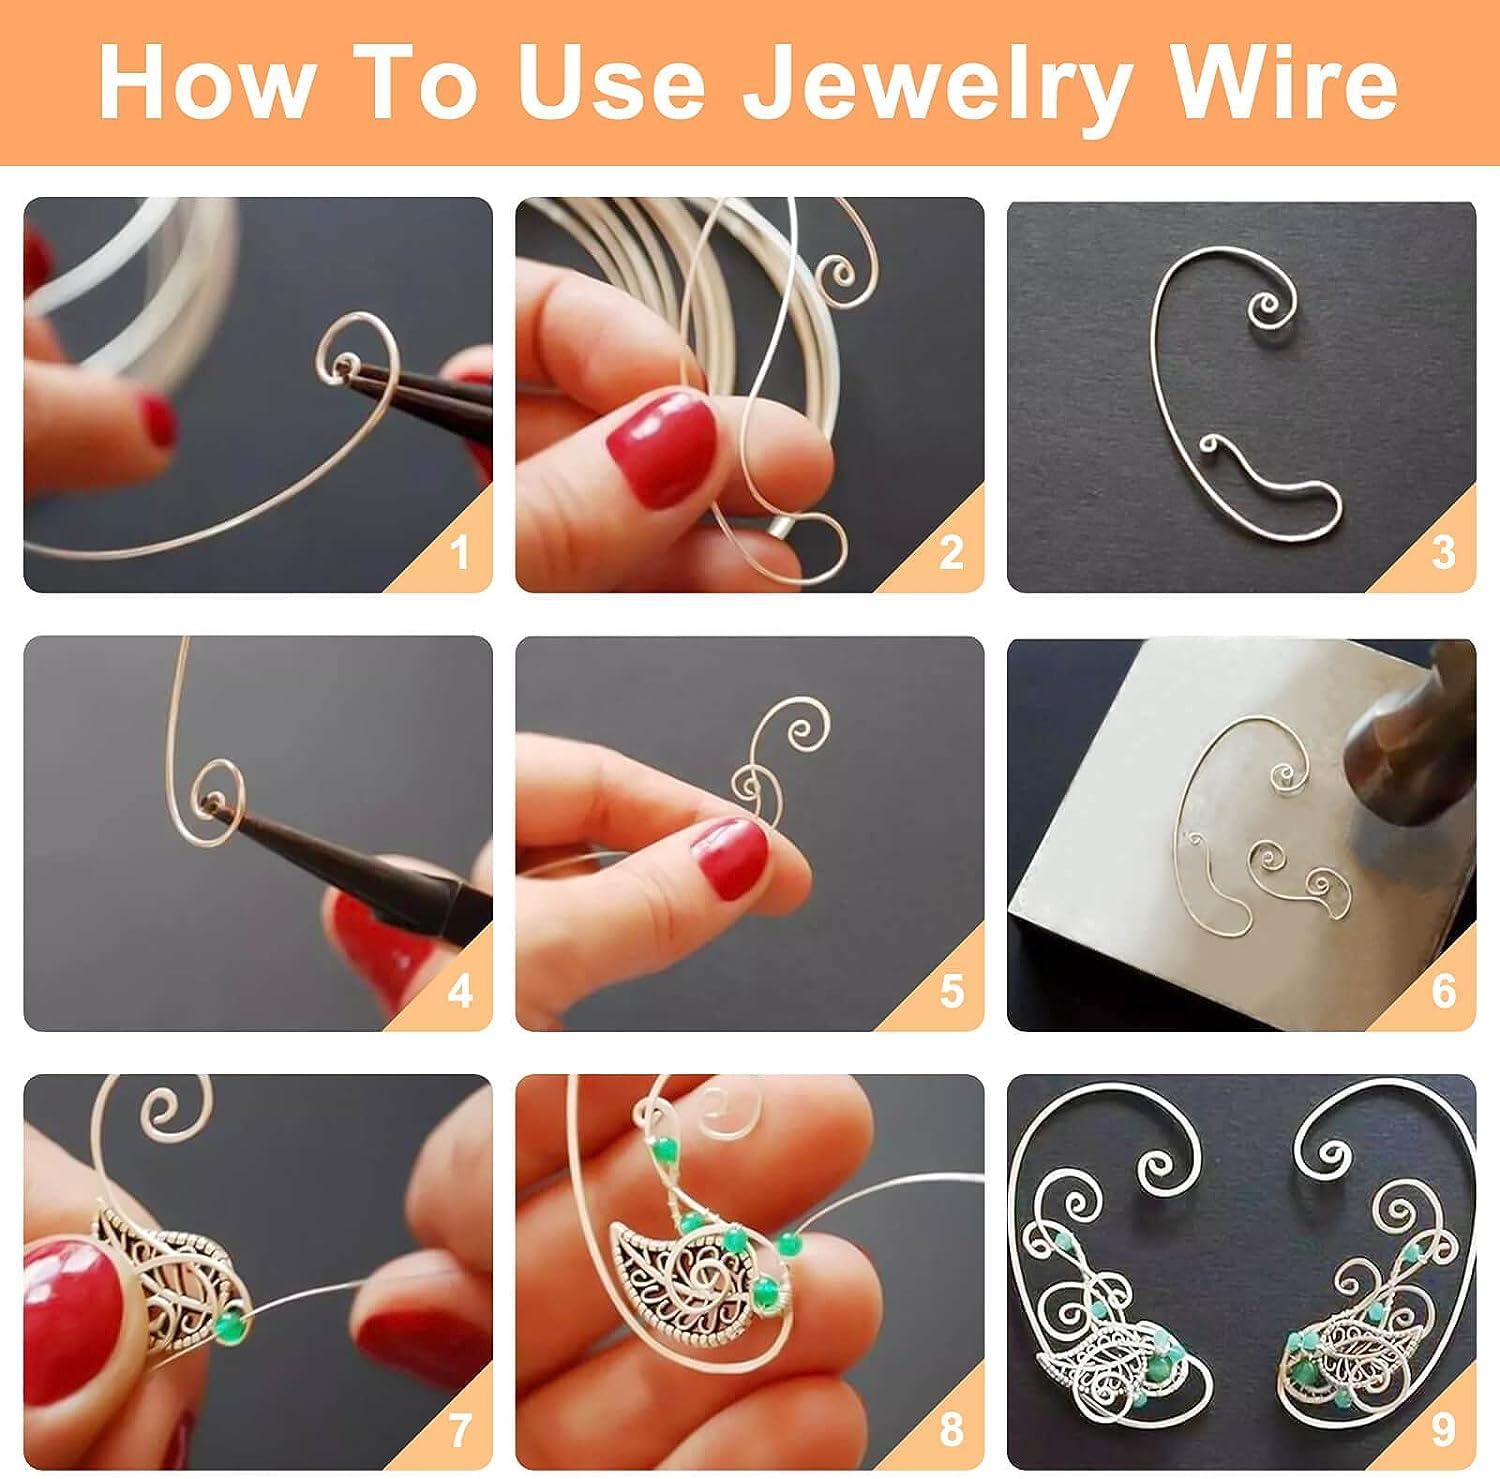 What Gauge of Wire Should I Use to Make Jewelry